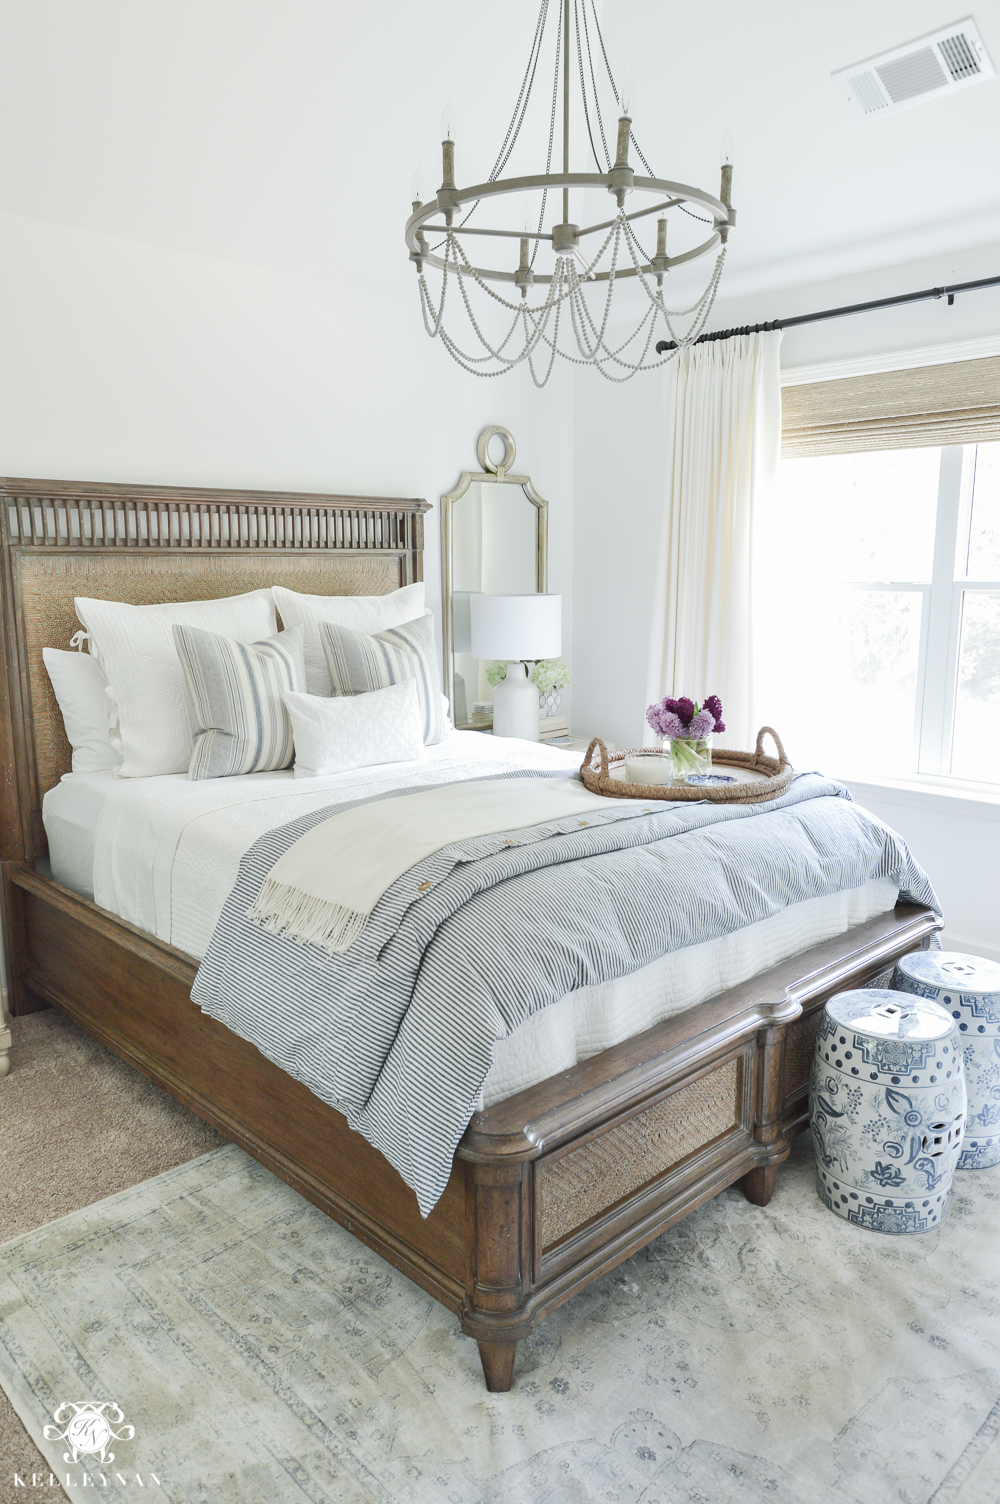 Shades of Summer Home Tour with Neutrals and Naturals-blue and white guest bedroom with cane bed and Sherwin Williams Alabaster Paint